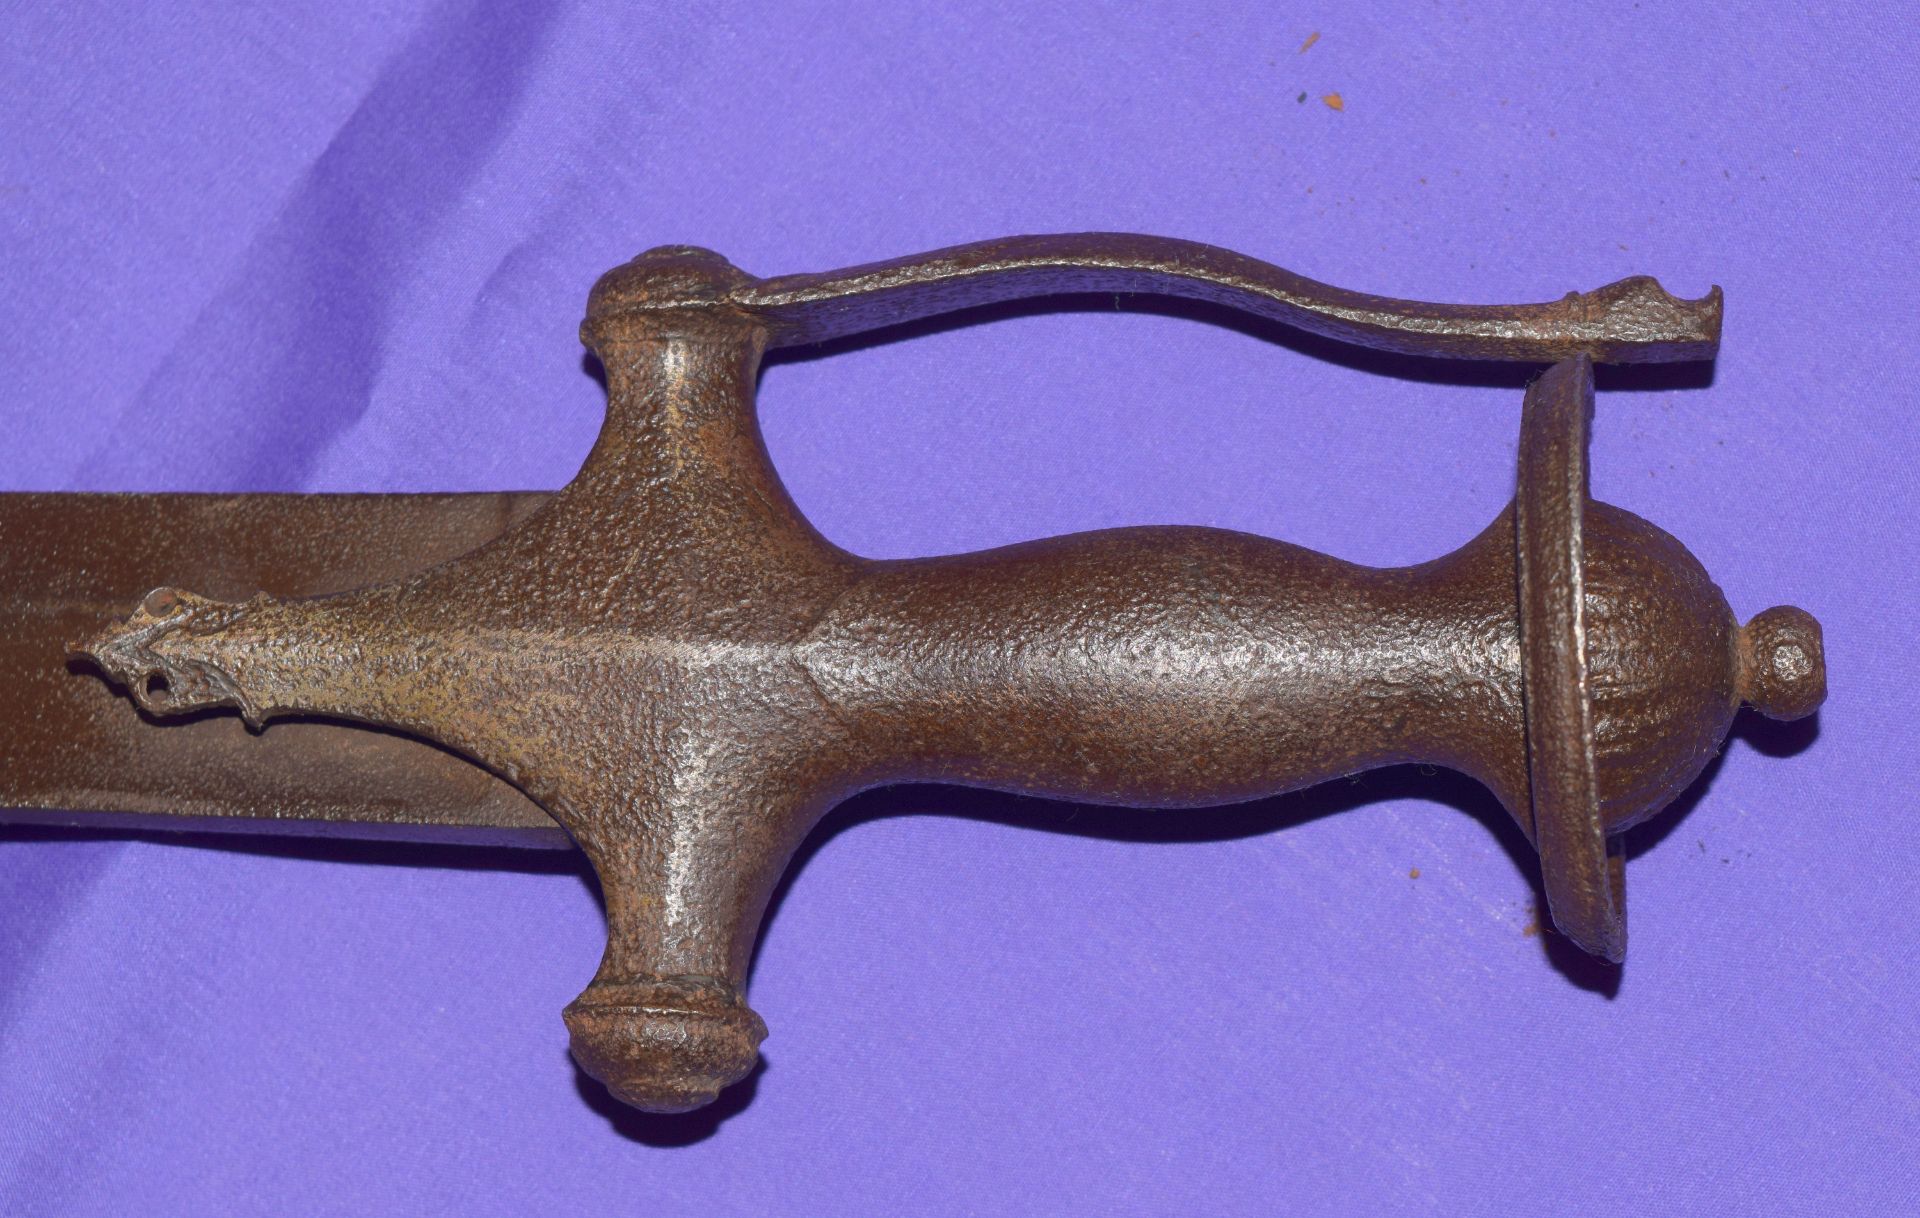 Vintage Indian Sub Continent Talwar Sword NO RESERVE - Image 3 of 4